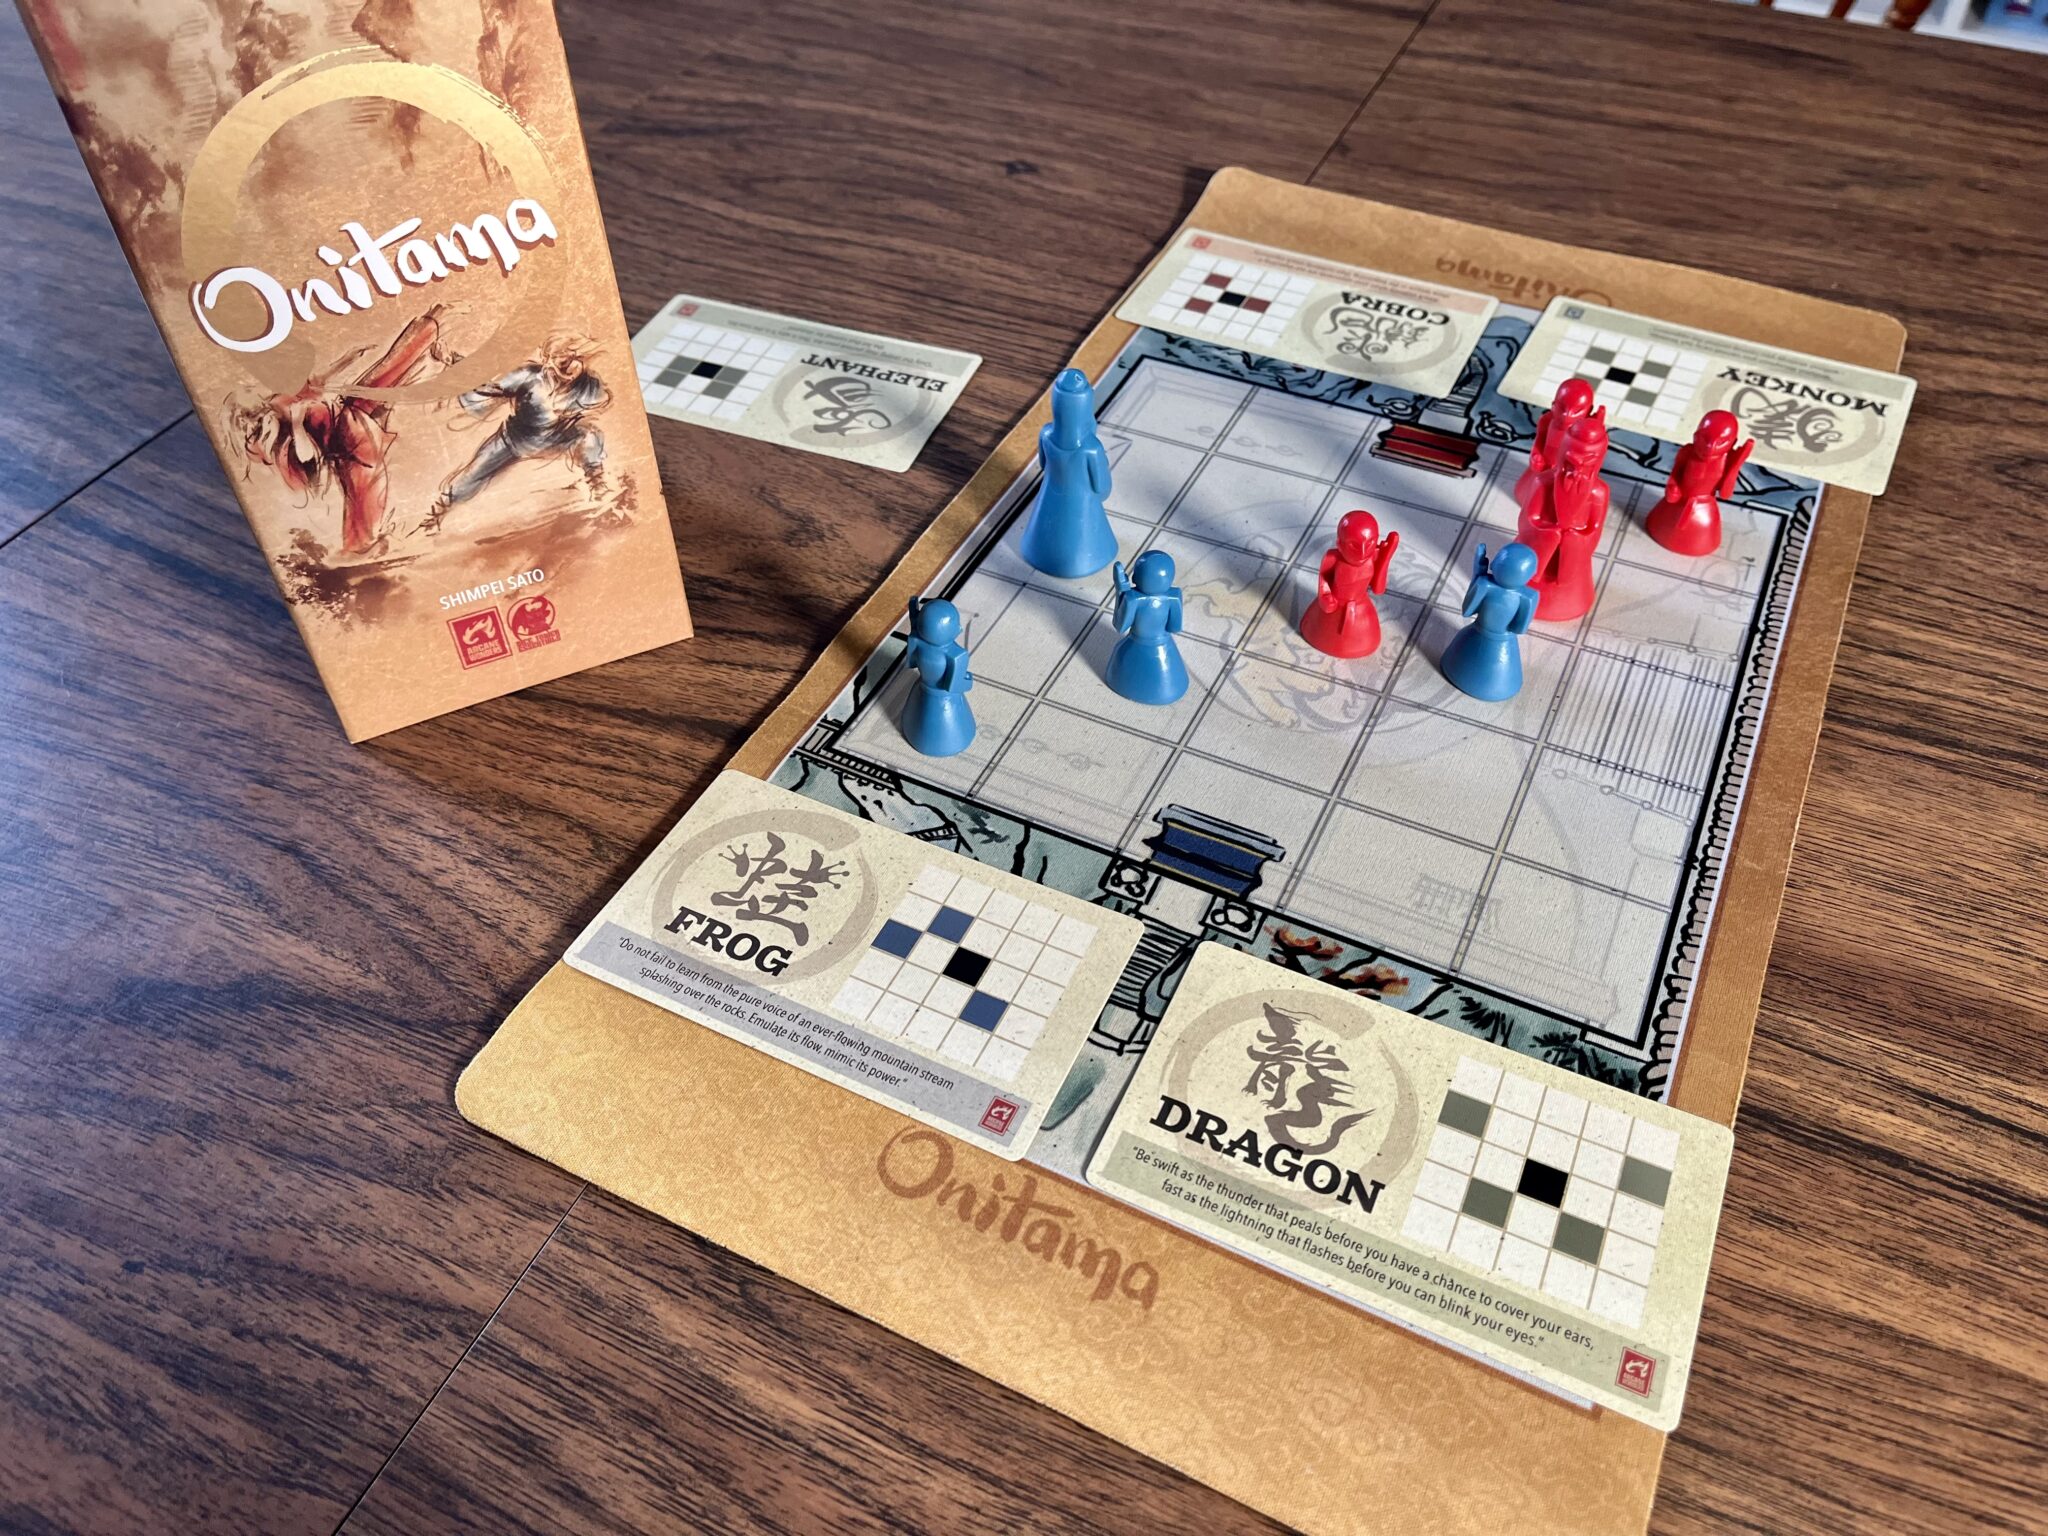 Onitama with all components on the table setup and played